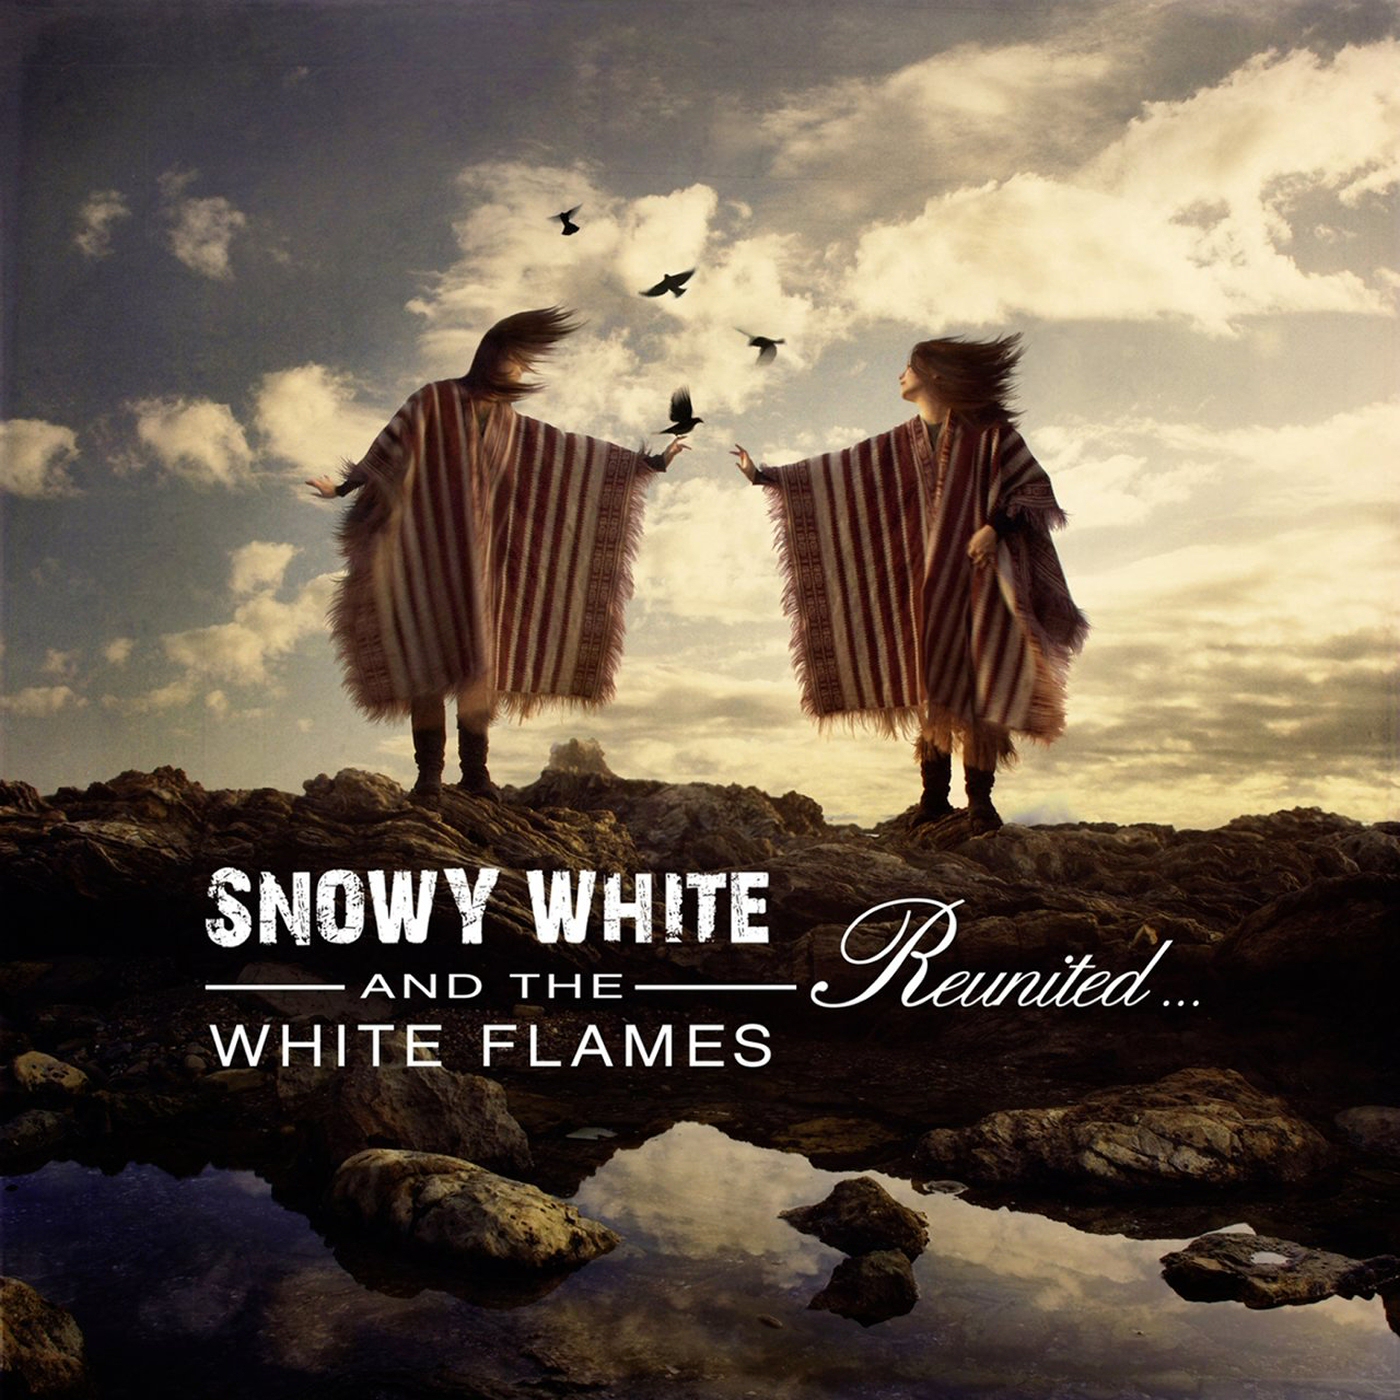 Snowy White and the White Flames - Reunited in DTS-wav ( op speciaal verzoek)